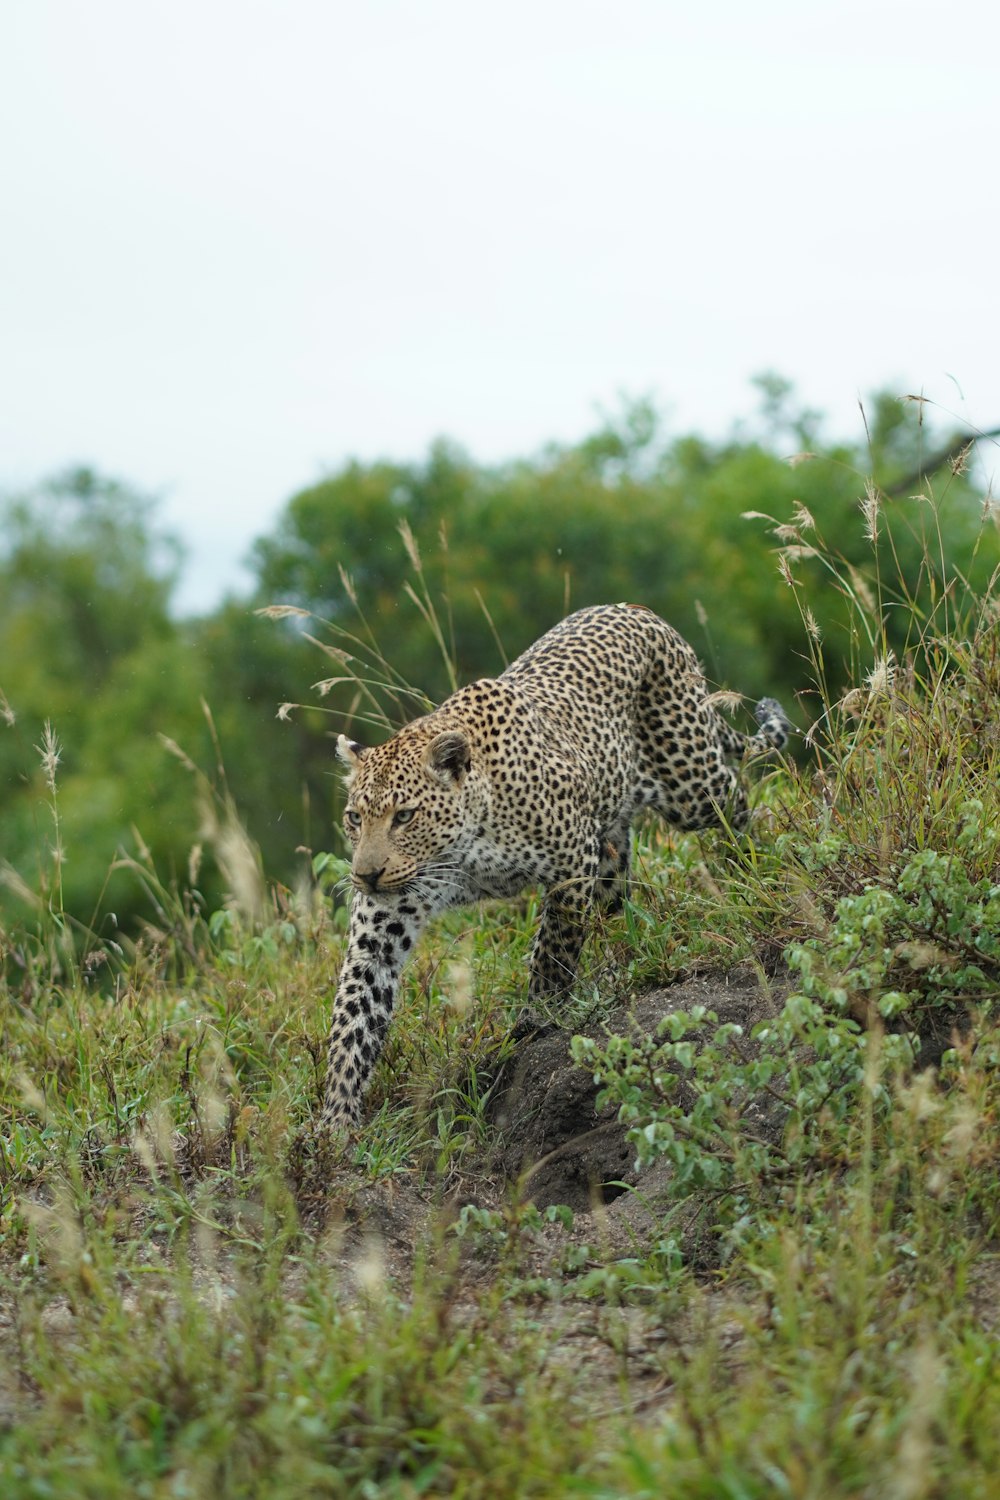 a leopard walking through a grassy area with trees in the background